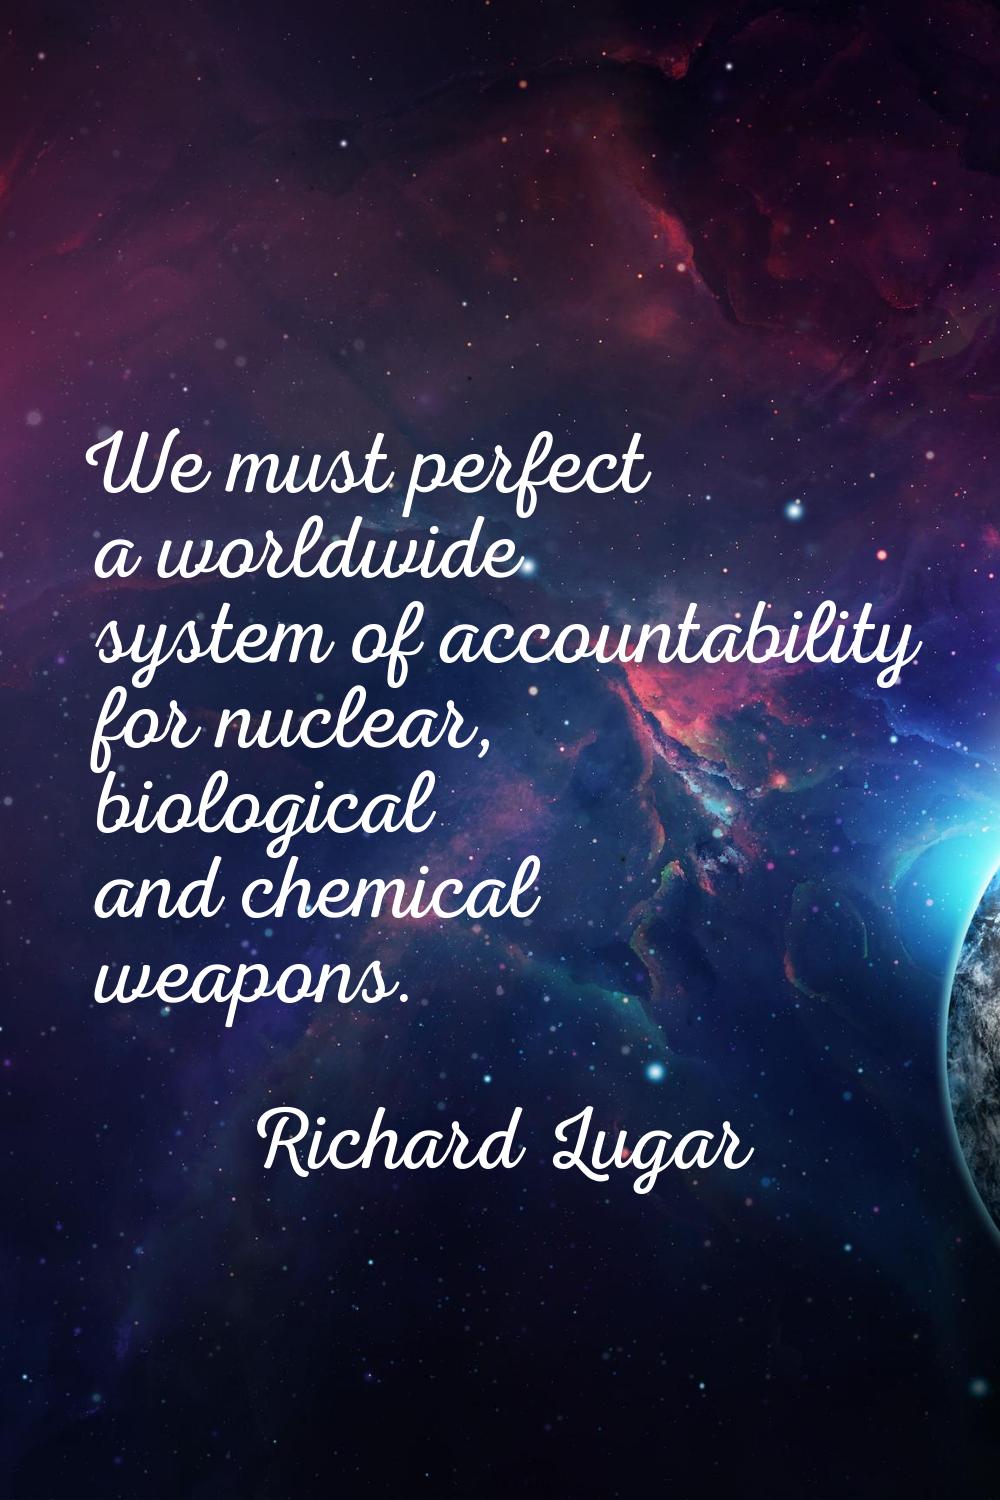 We must perfect a worldwide system of accountability for nuclear, biological and chemical weapons.